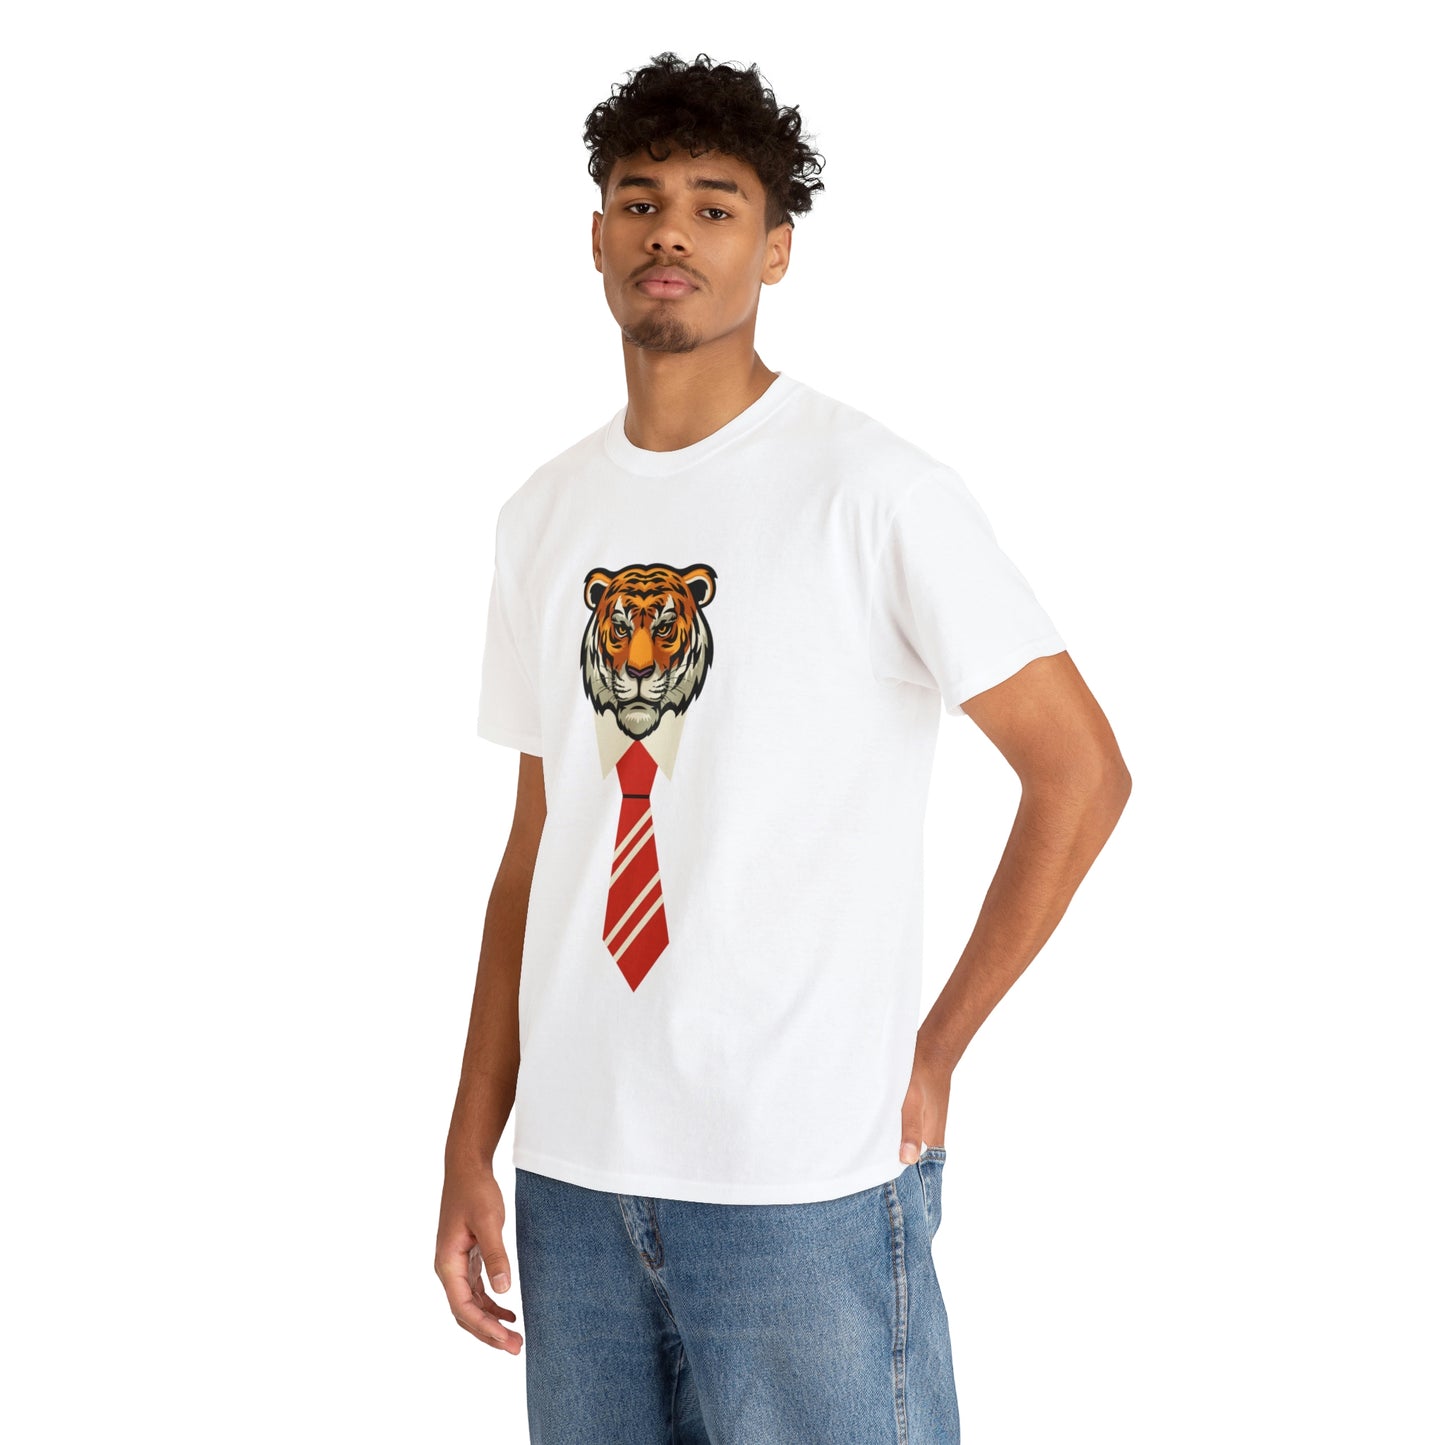 Tiger Tie Your Style Our Custom Printed Tee Unique Design Comfortable Fit Personalized for You color, funny tshirt tee shirt motivation